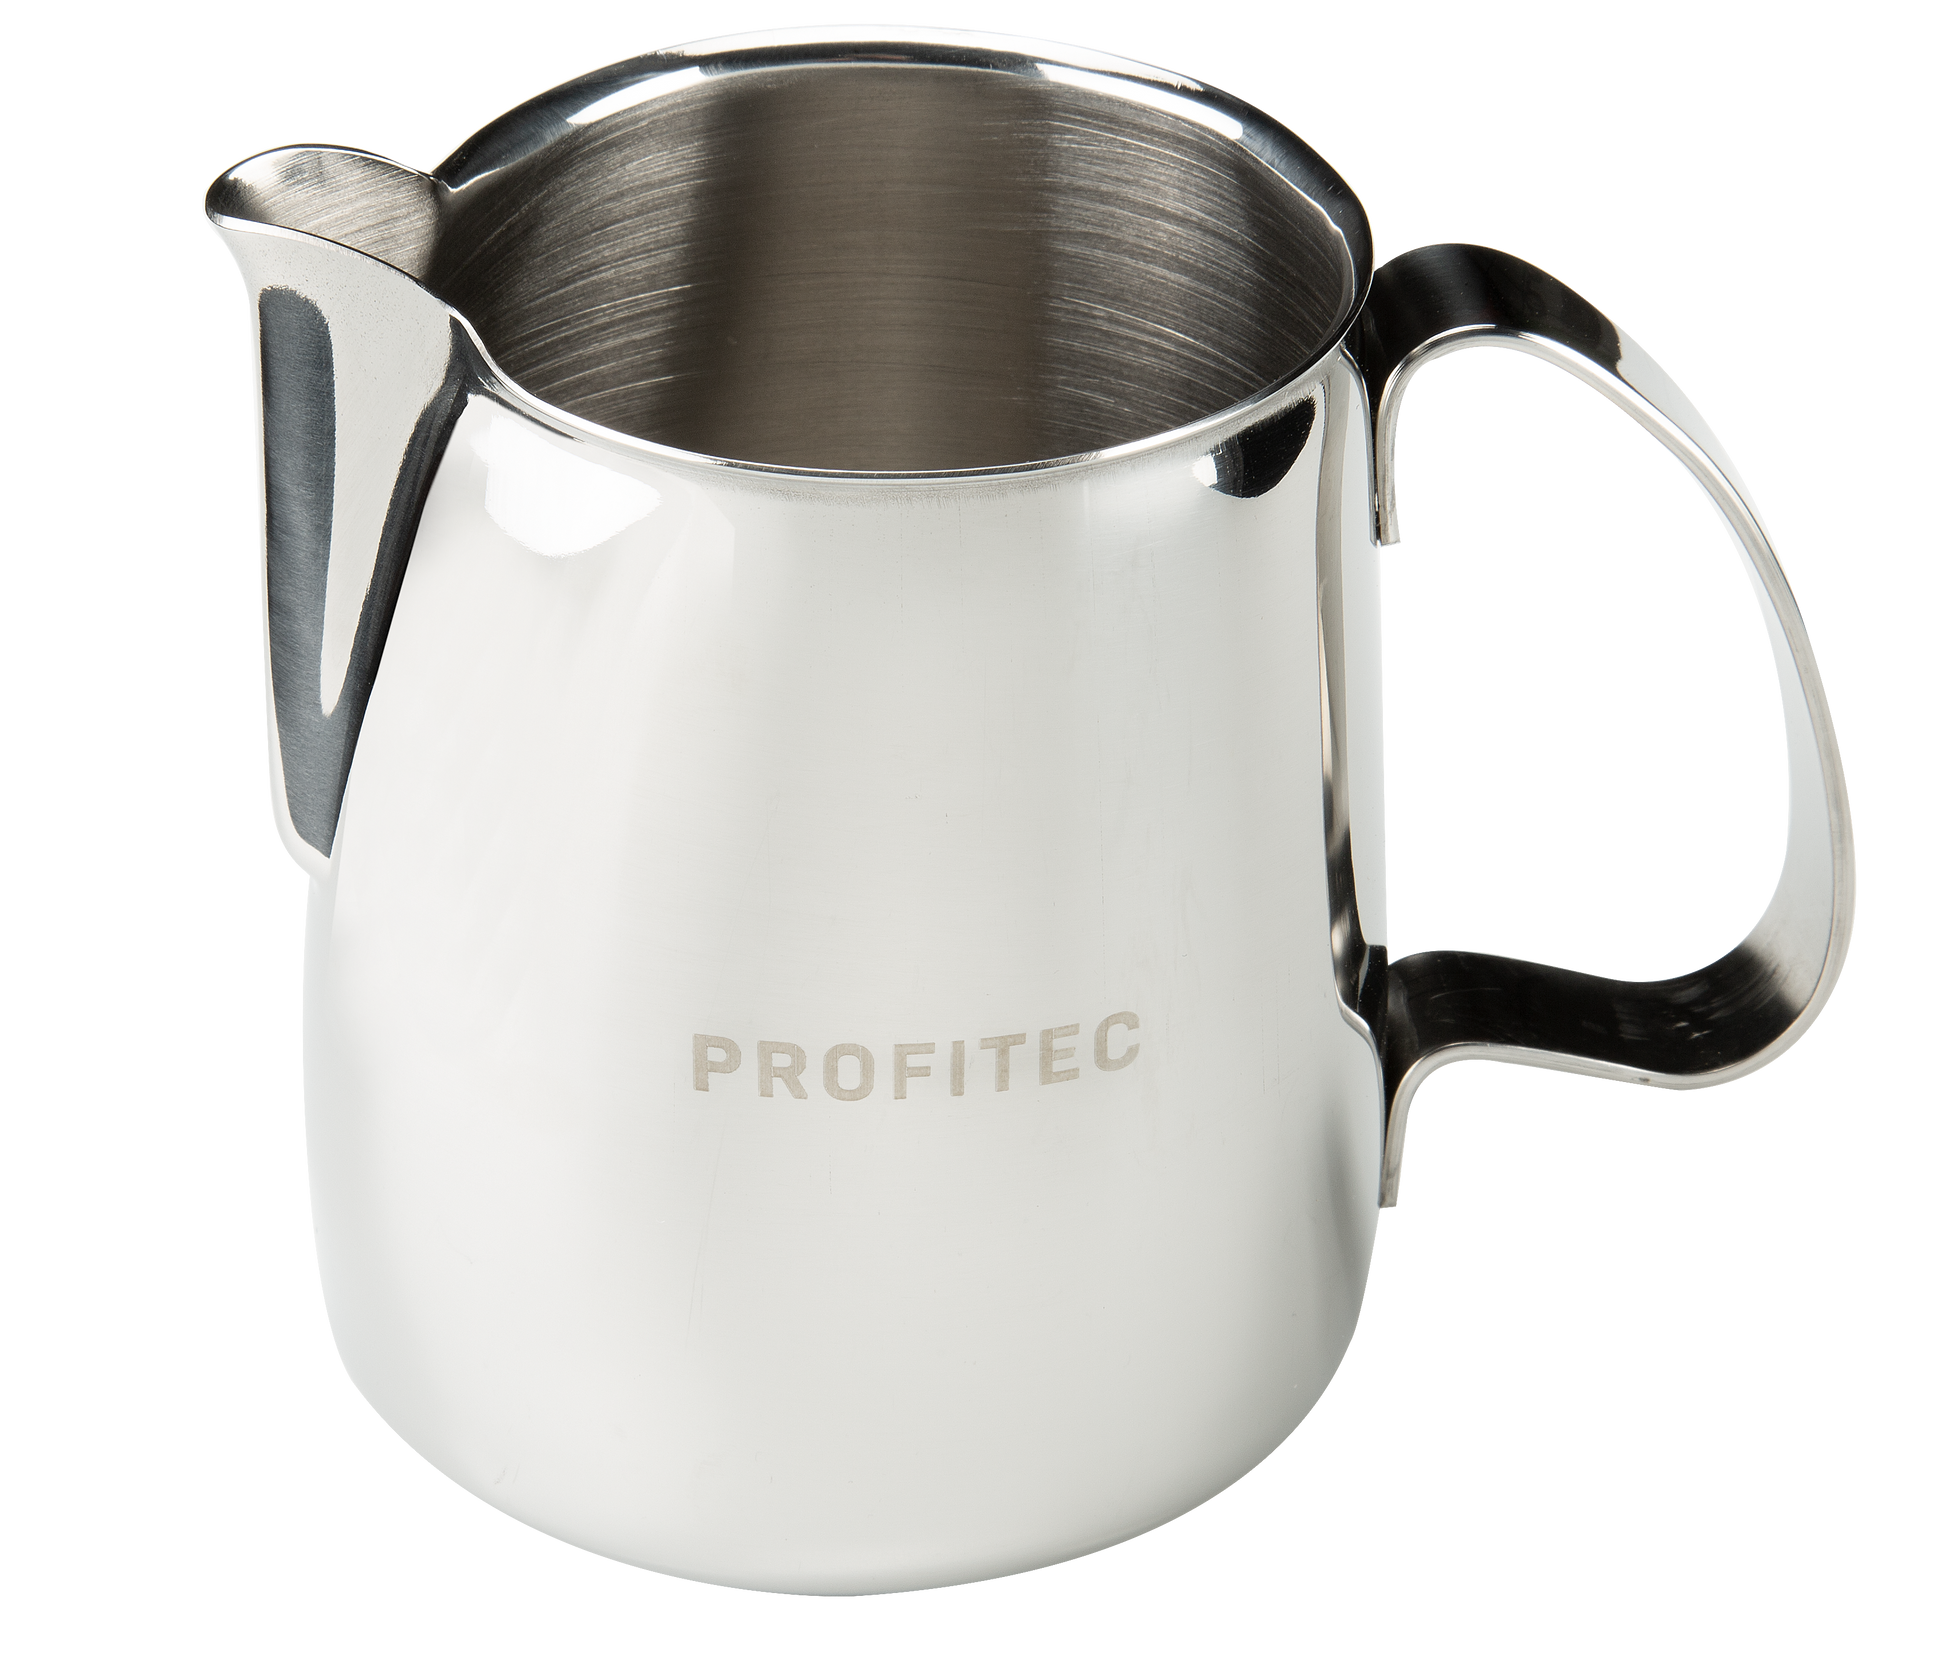 This Mini Pitcher Is Useful for Much More Than Your Lattes